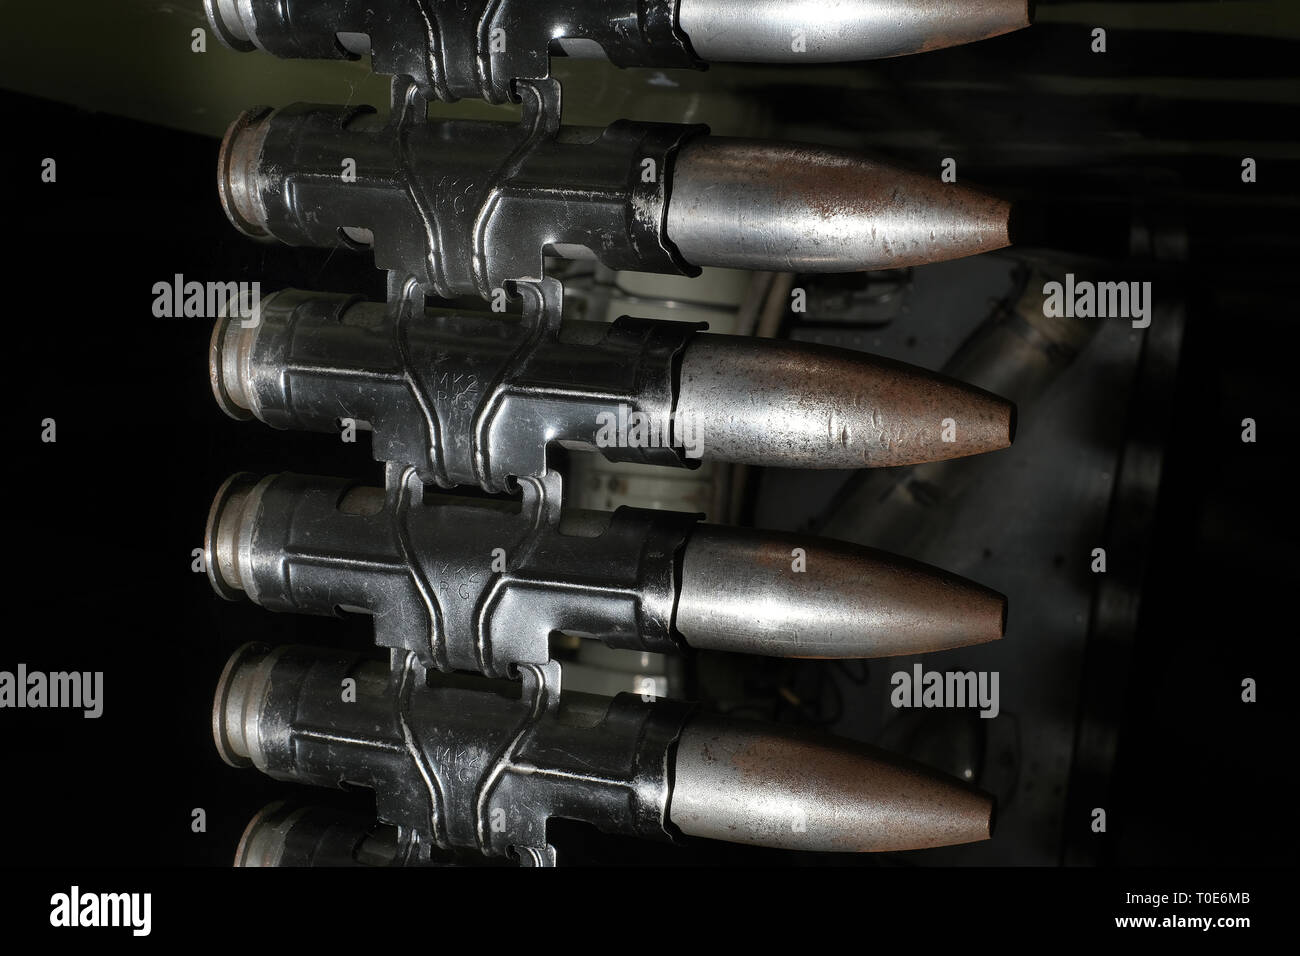 30 mm cannon shells in link ready to load into fast jet fighter aircraft weapon system. Stock Photo